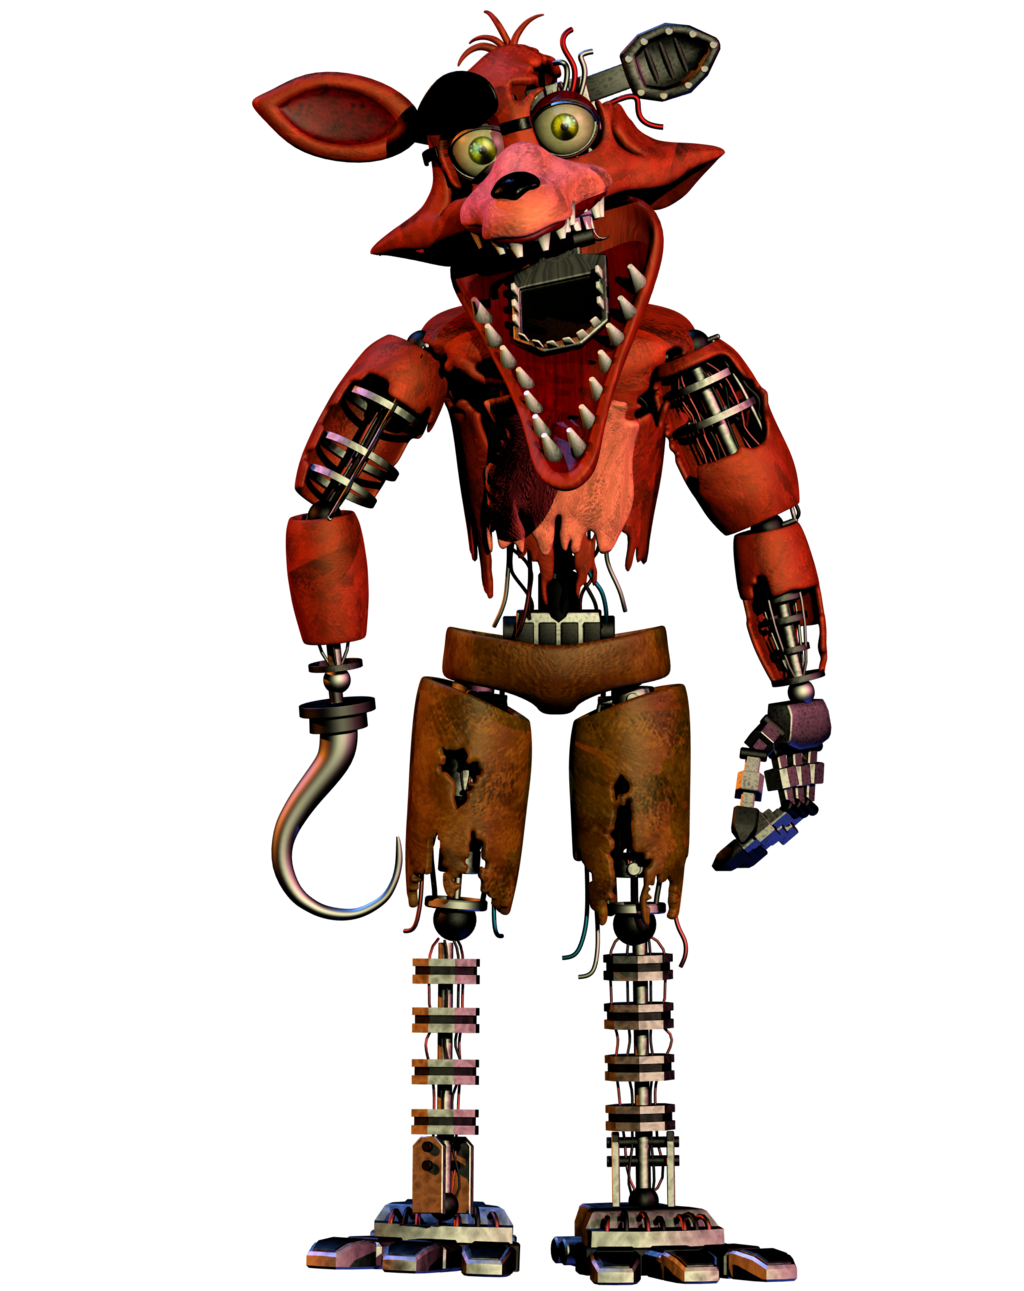 Nightmare Withered Foxy